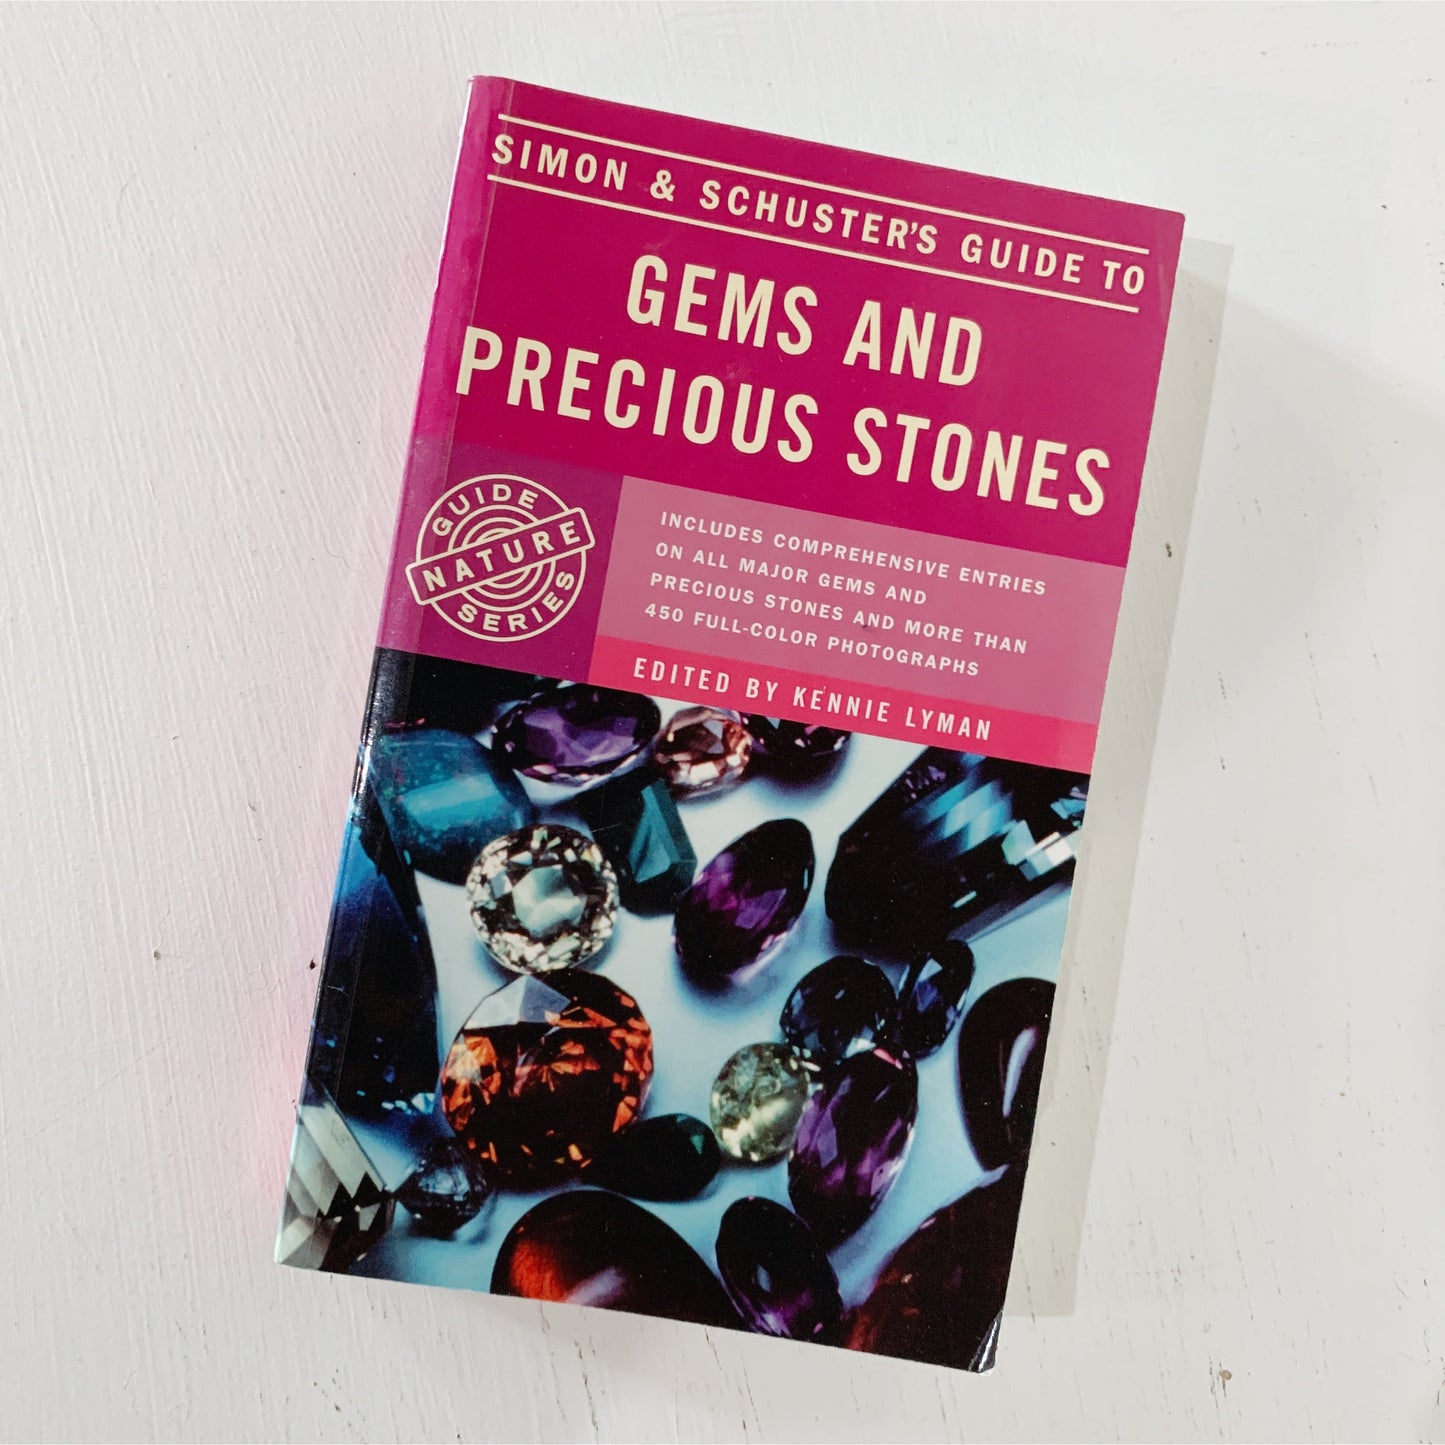 Simon and Schuster's Guide to Gems and Precious Stones, Paperback, 1986